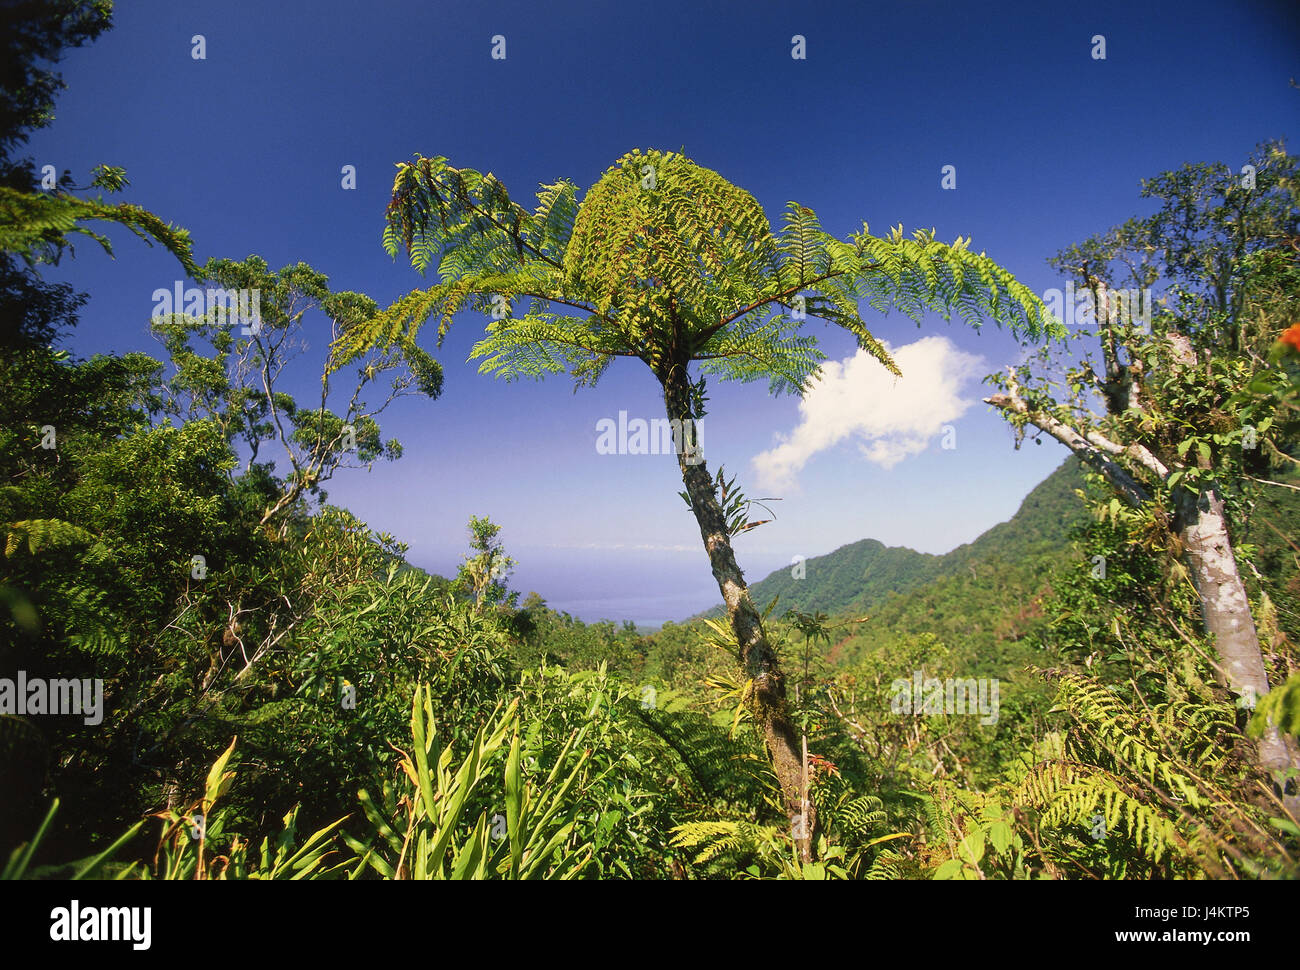 The Comoro Archipelago, island Anjouan, scenery, treefern, sea view Africa, island state, Nzwani, Indian ocean, sea, vegetation, botany, nature, tropical, excessively, green, heavenly, exotic, plants, plant world, flora, shrubs, trees, view Stock Photo